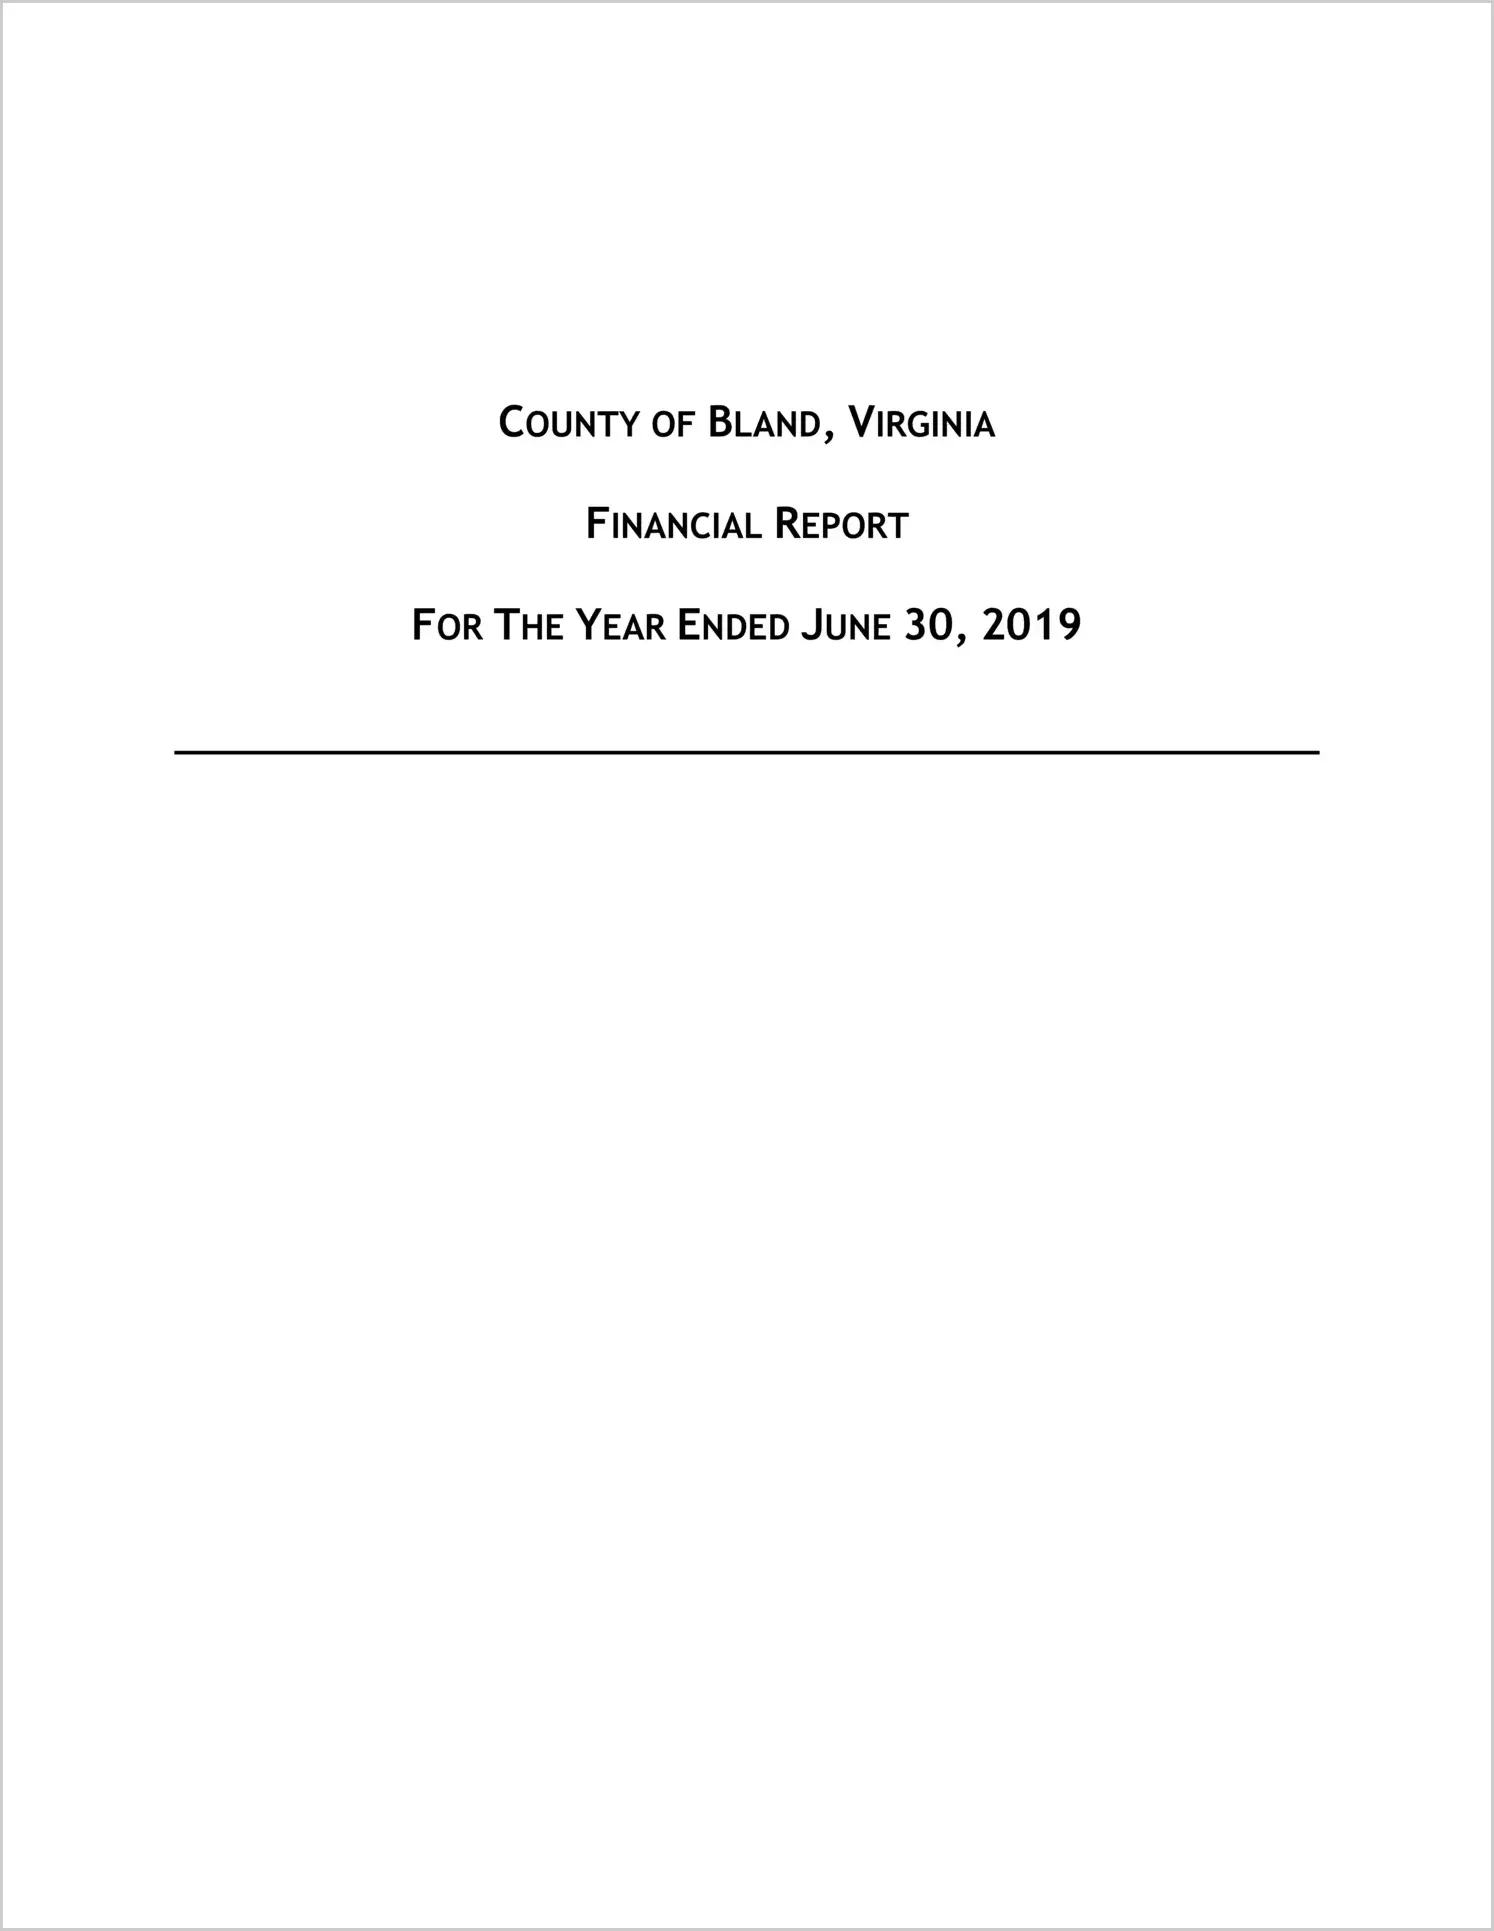 2019 Annual Financial Report for County of Bland